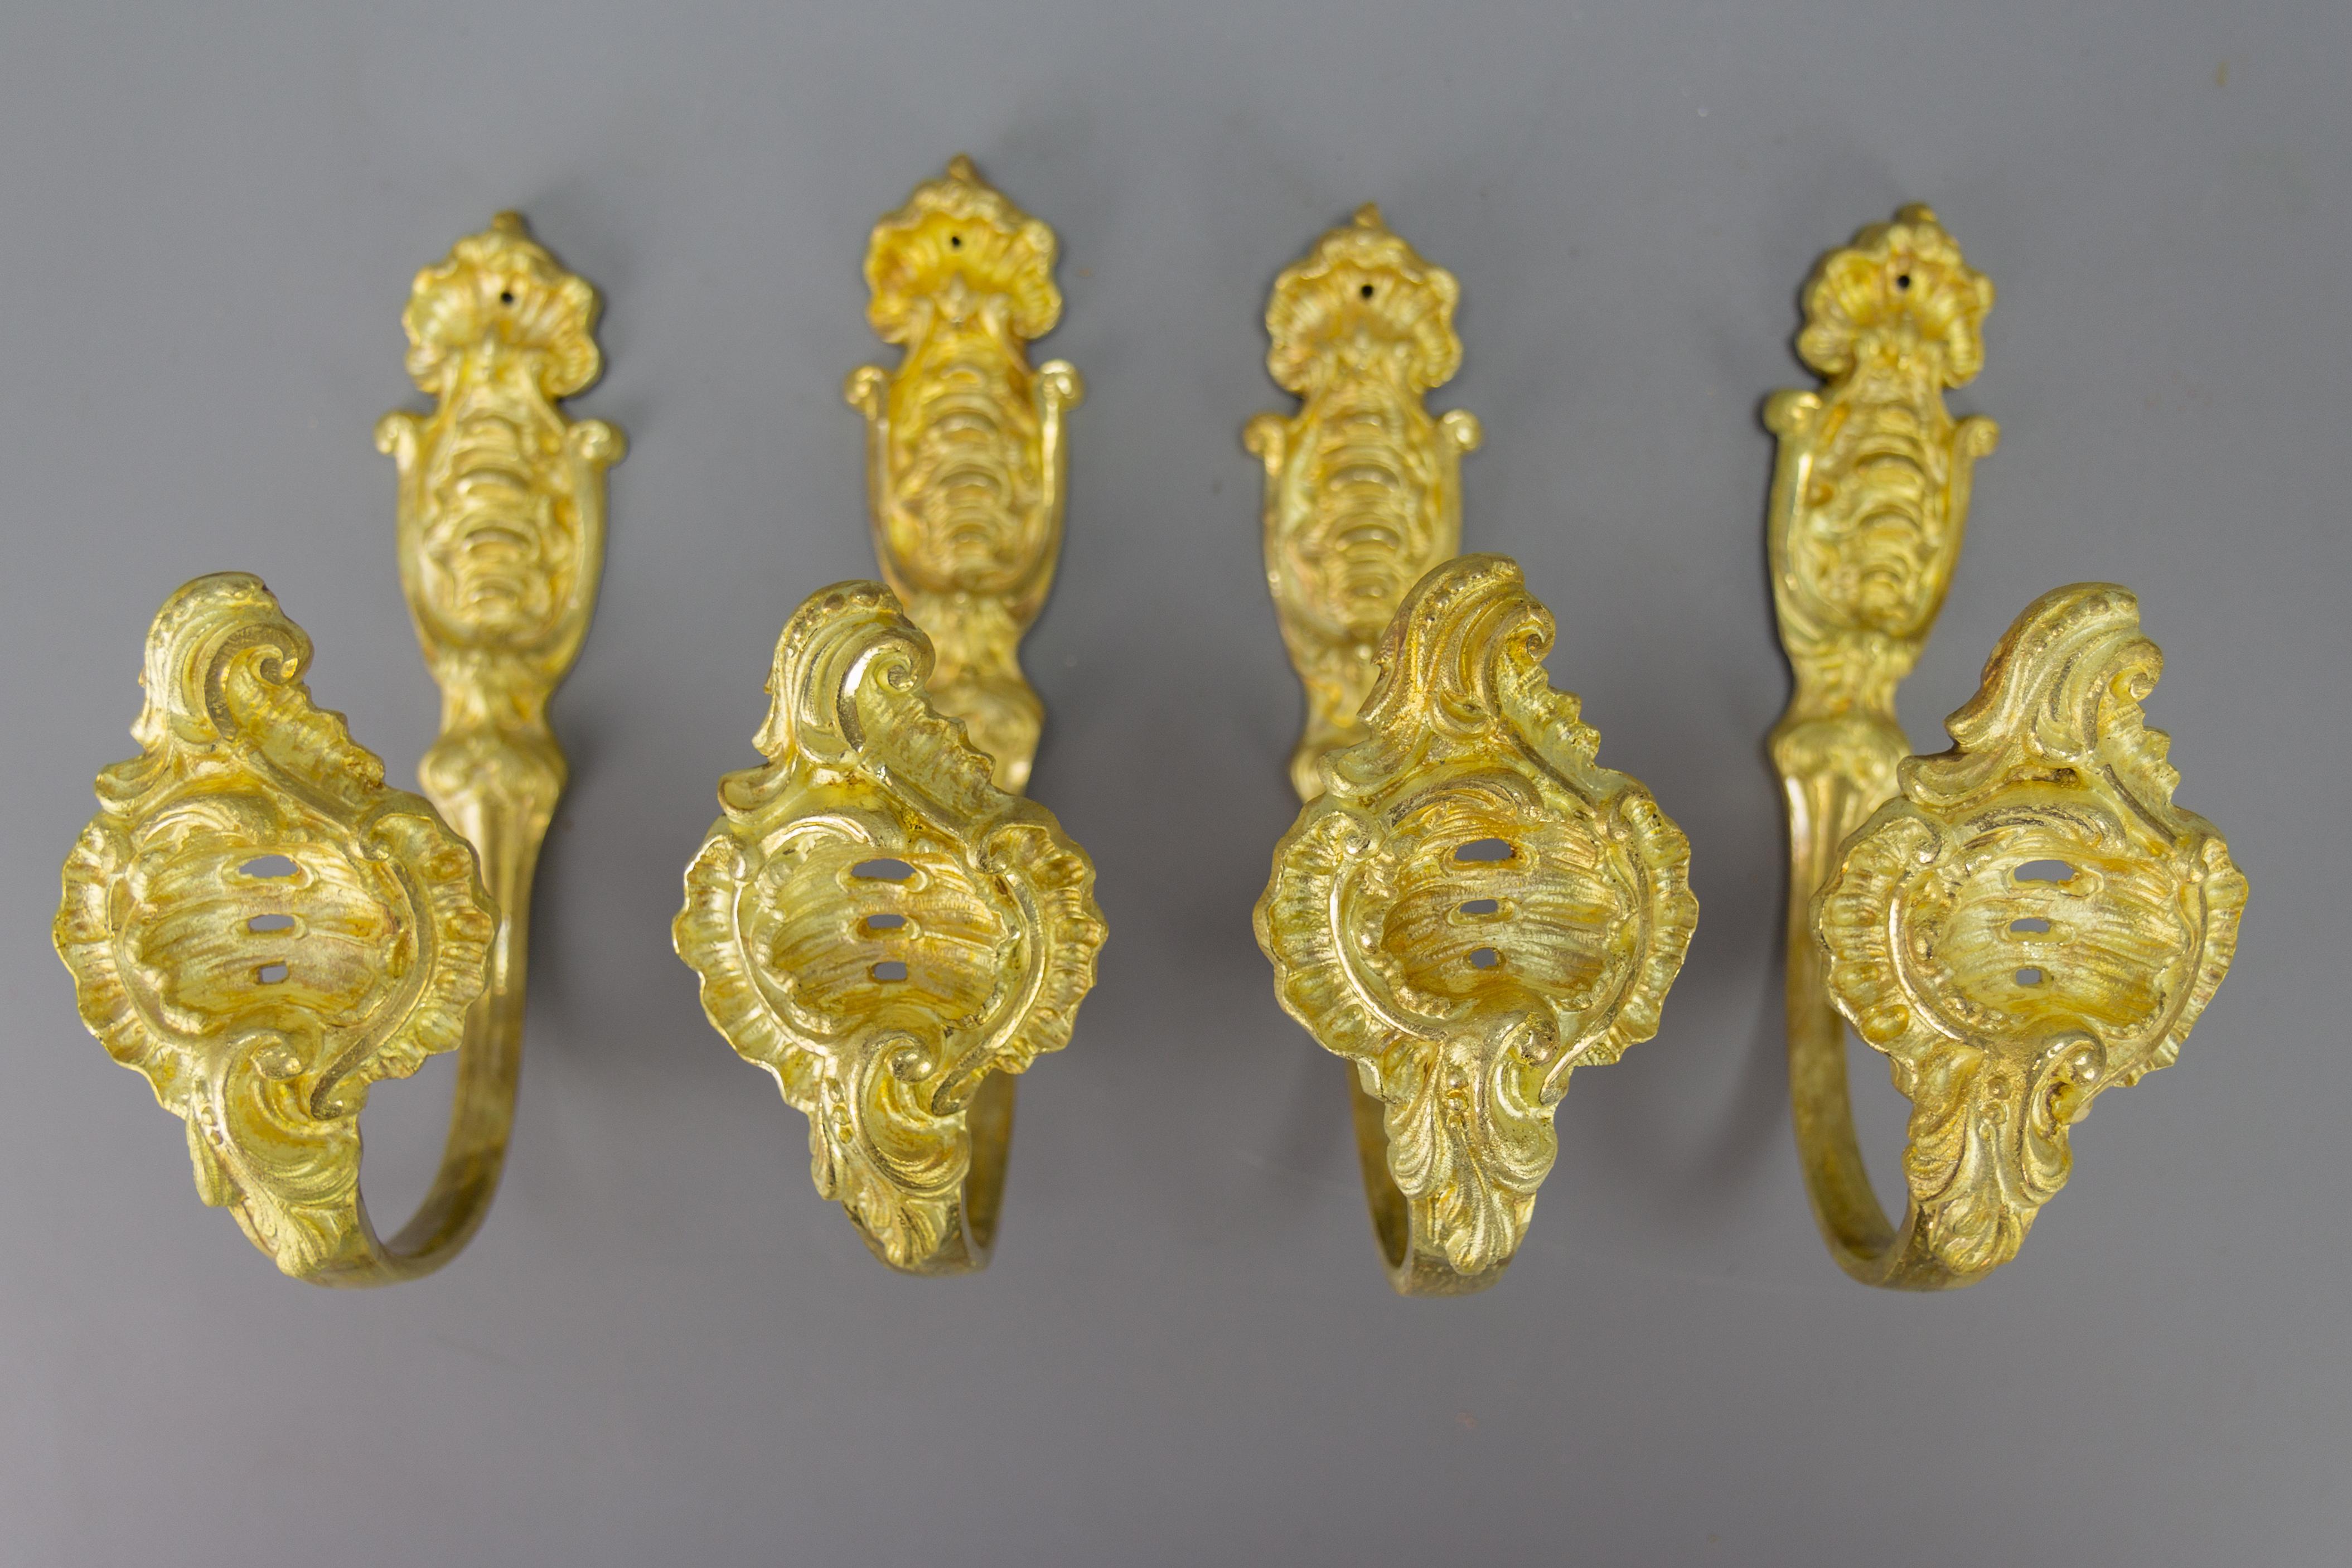 Antique French Rococo style gilt bronze curtain tiebacks or curtain holders, set of four.
A beautiful and impressive set of four Rococo or Louis XV-style gilt bronze curtain holders or supports, or tiebacks. These splendid curtain supports are